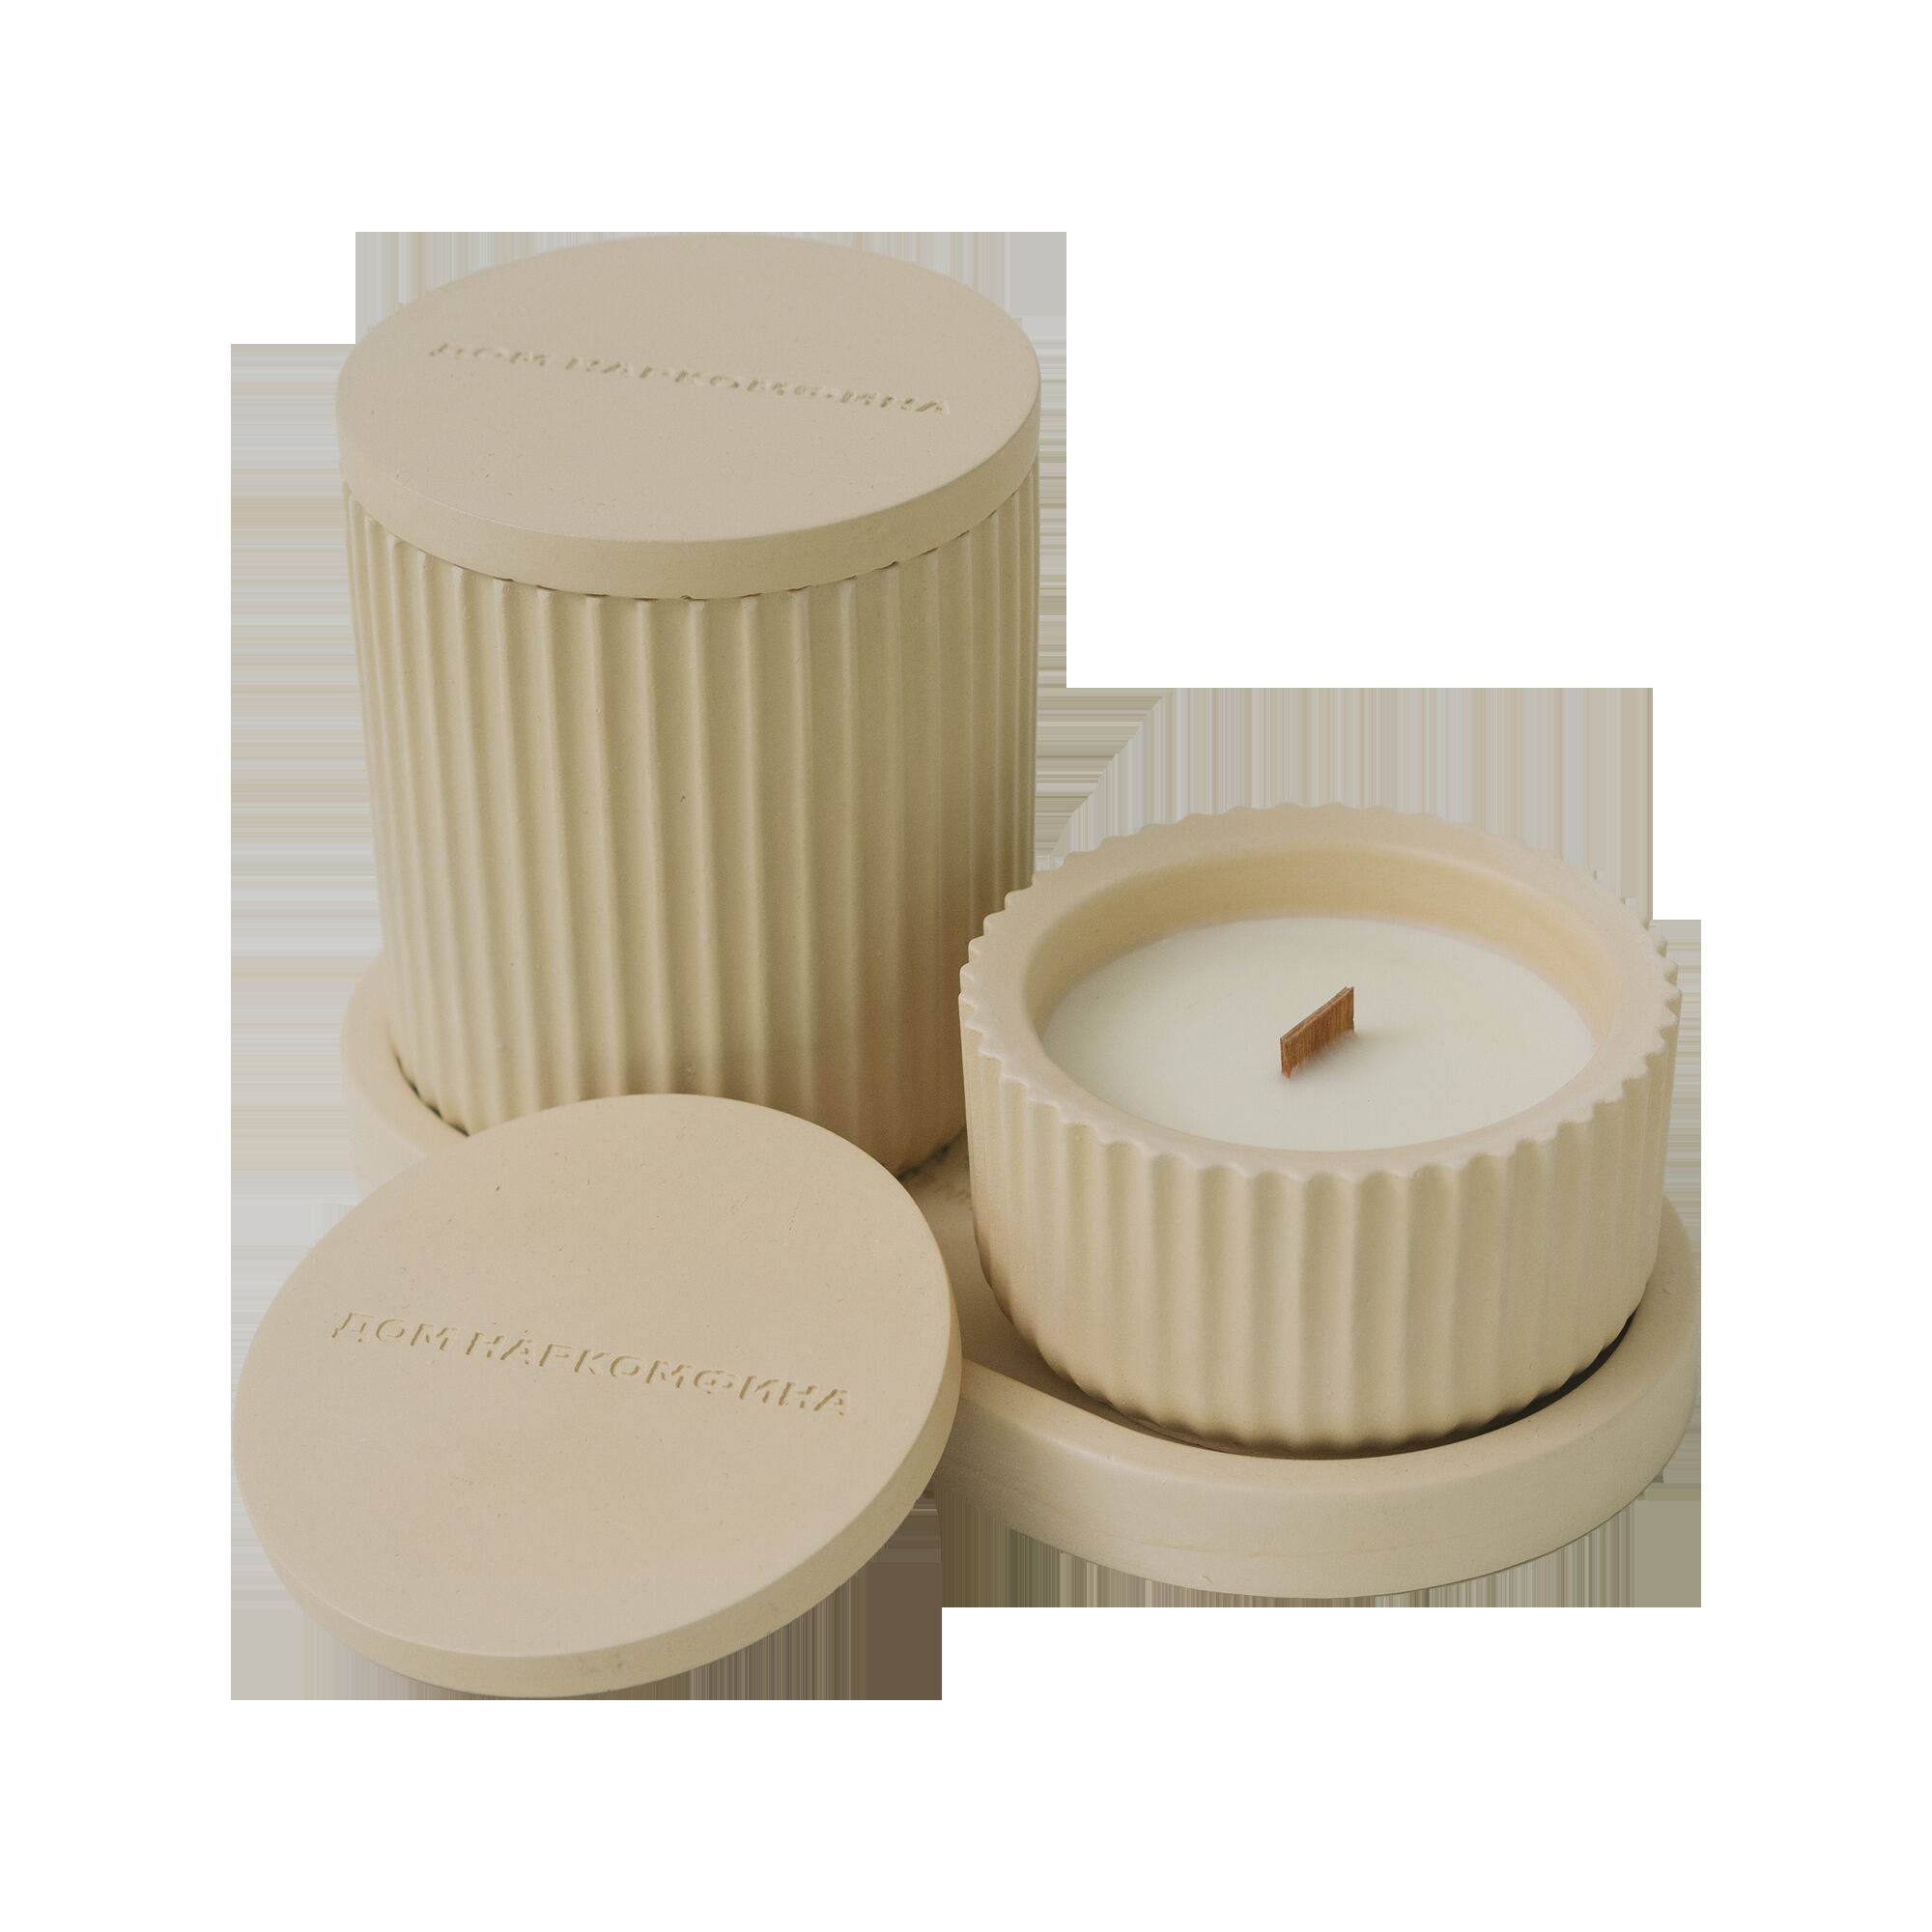 GK-1 Scented Candle Set